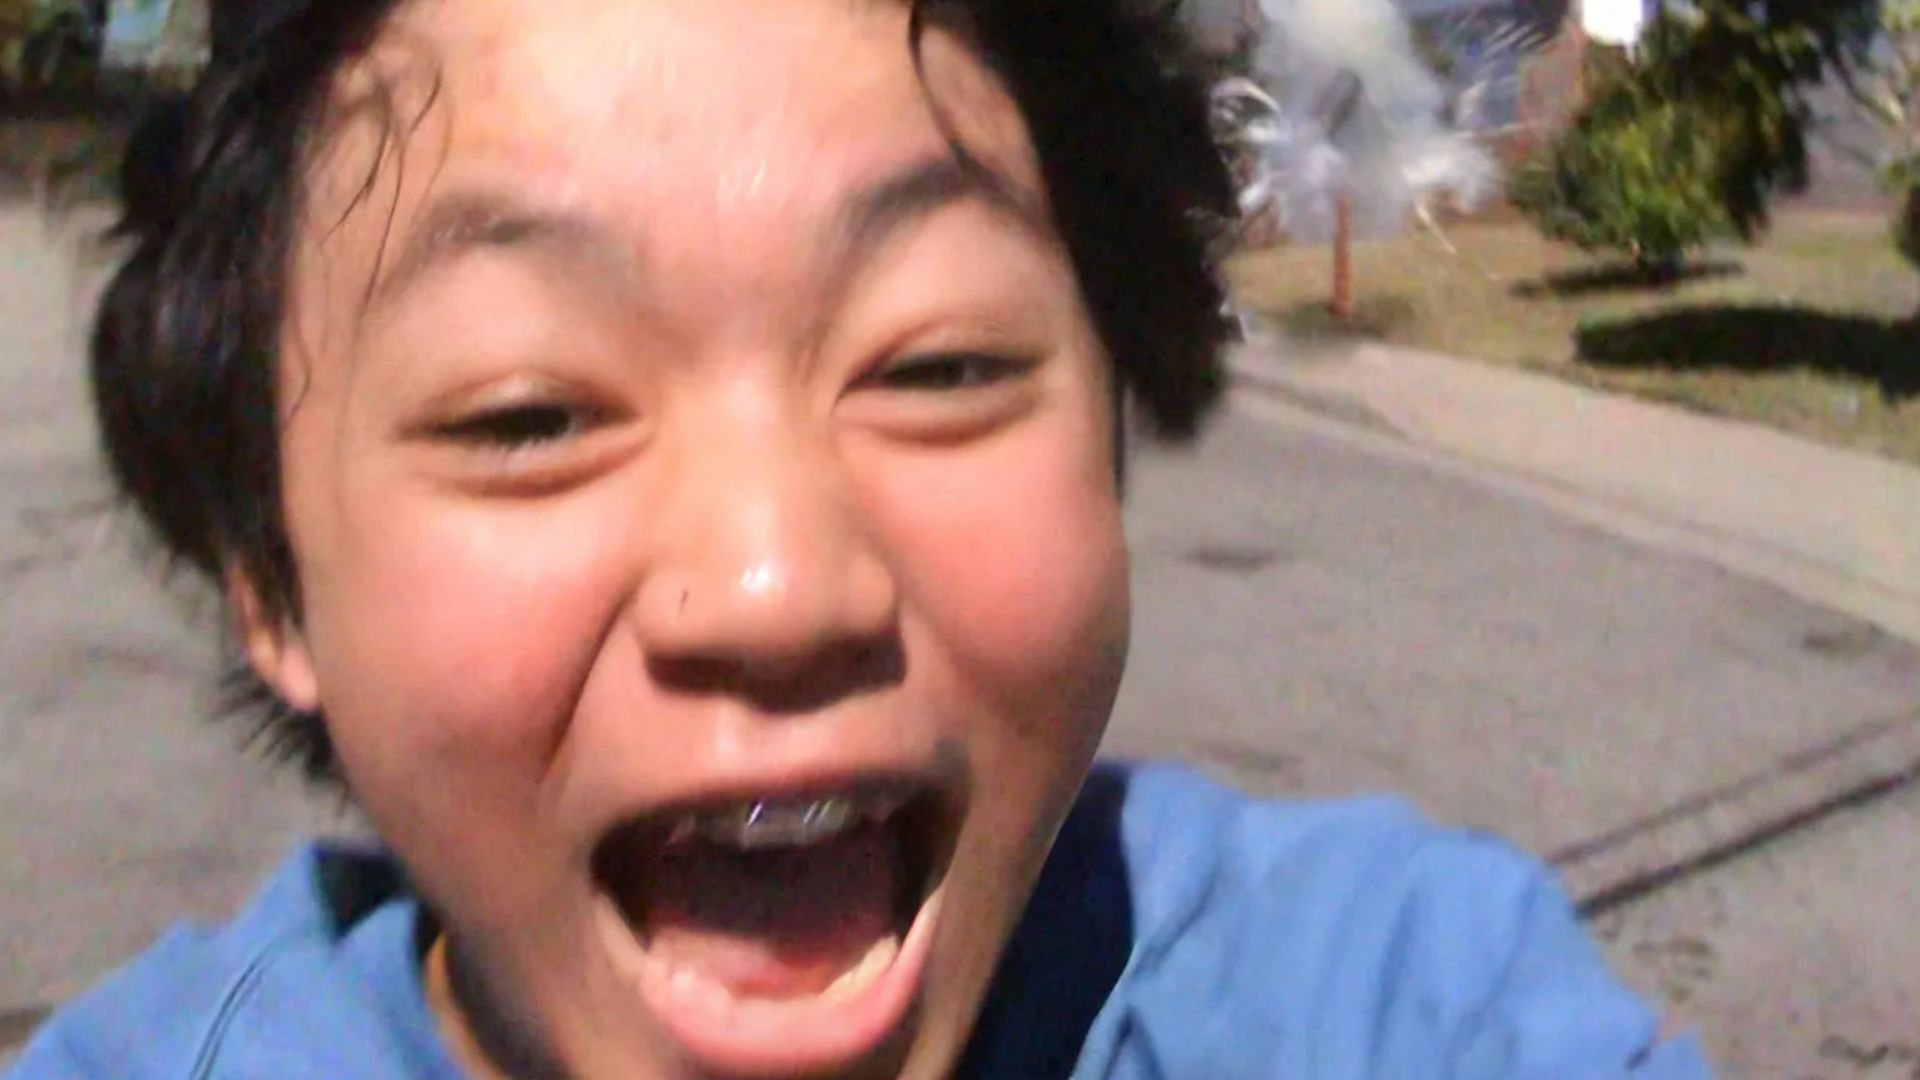 young boy outside taking selfie up close of face with mouth open joy 